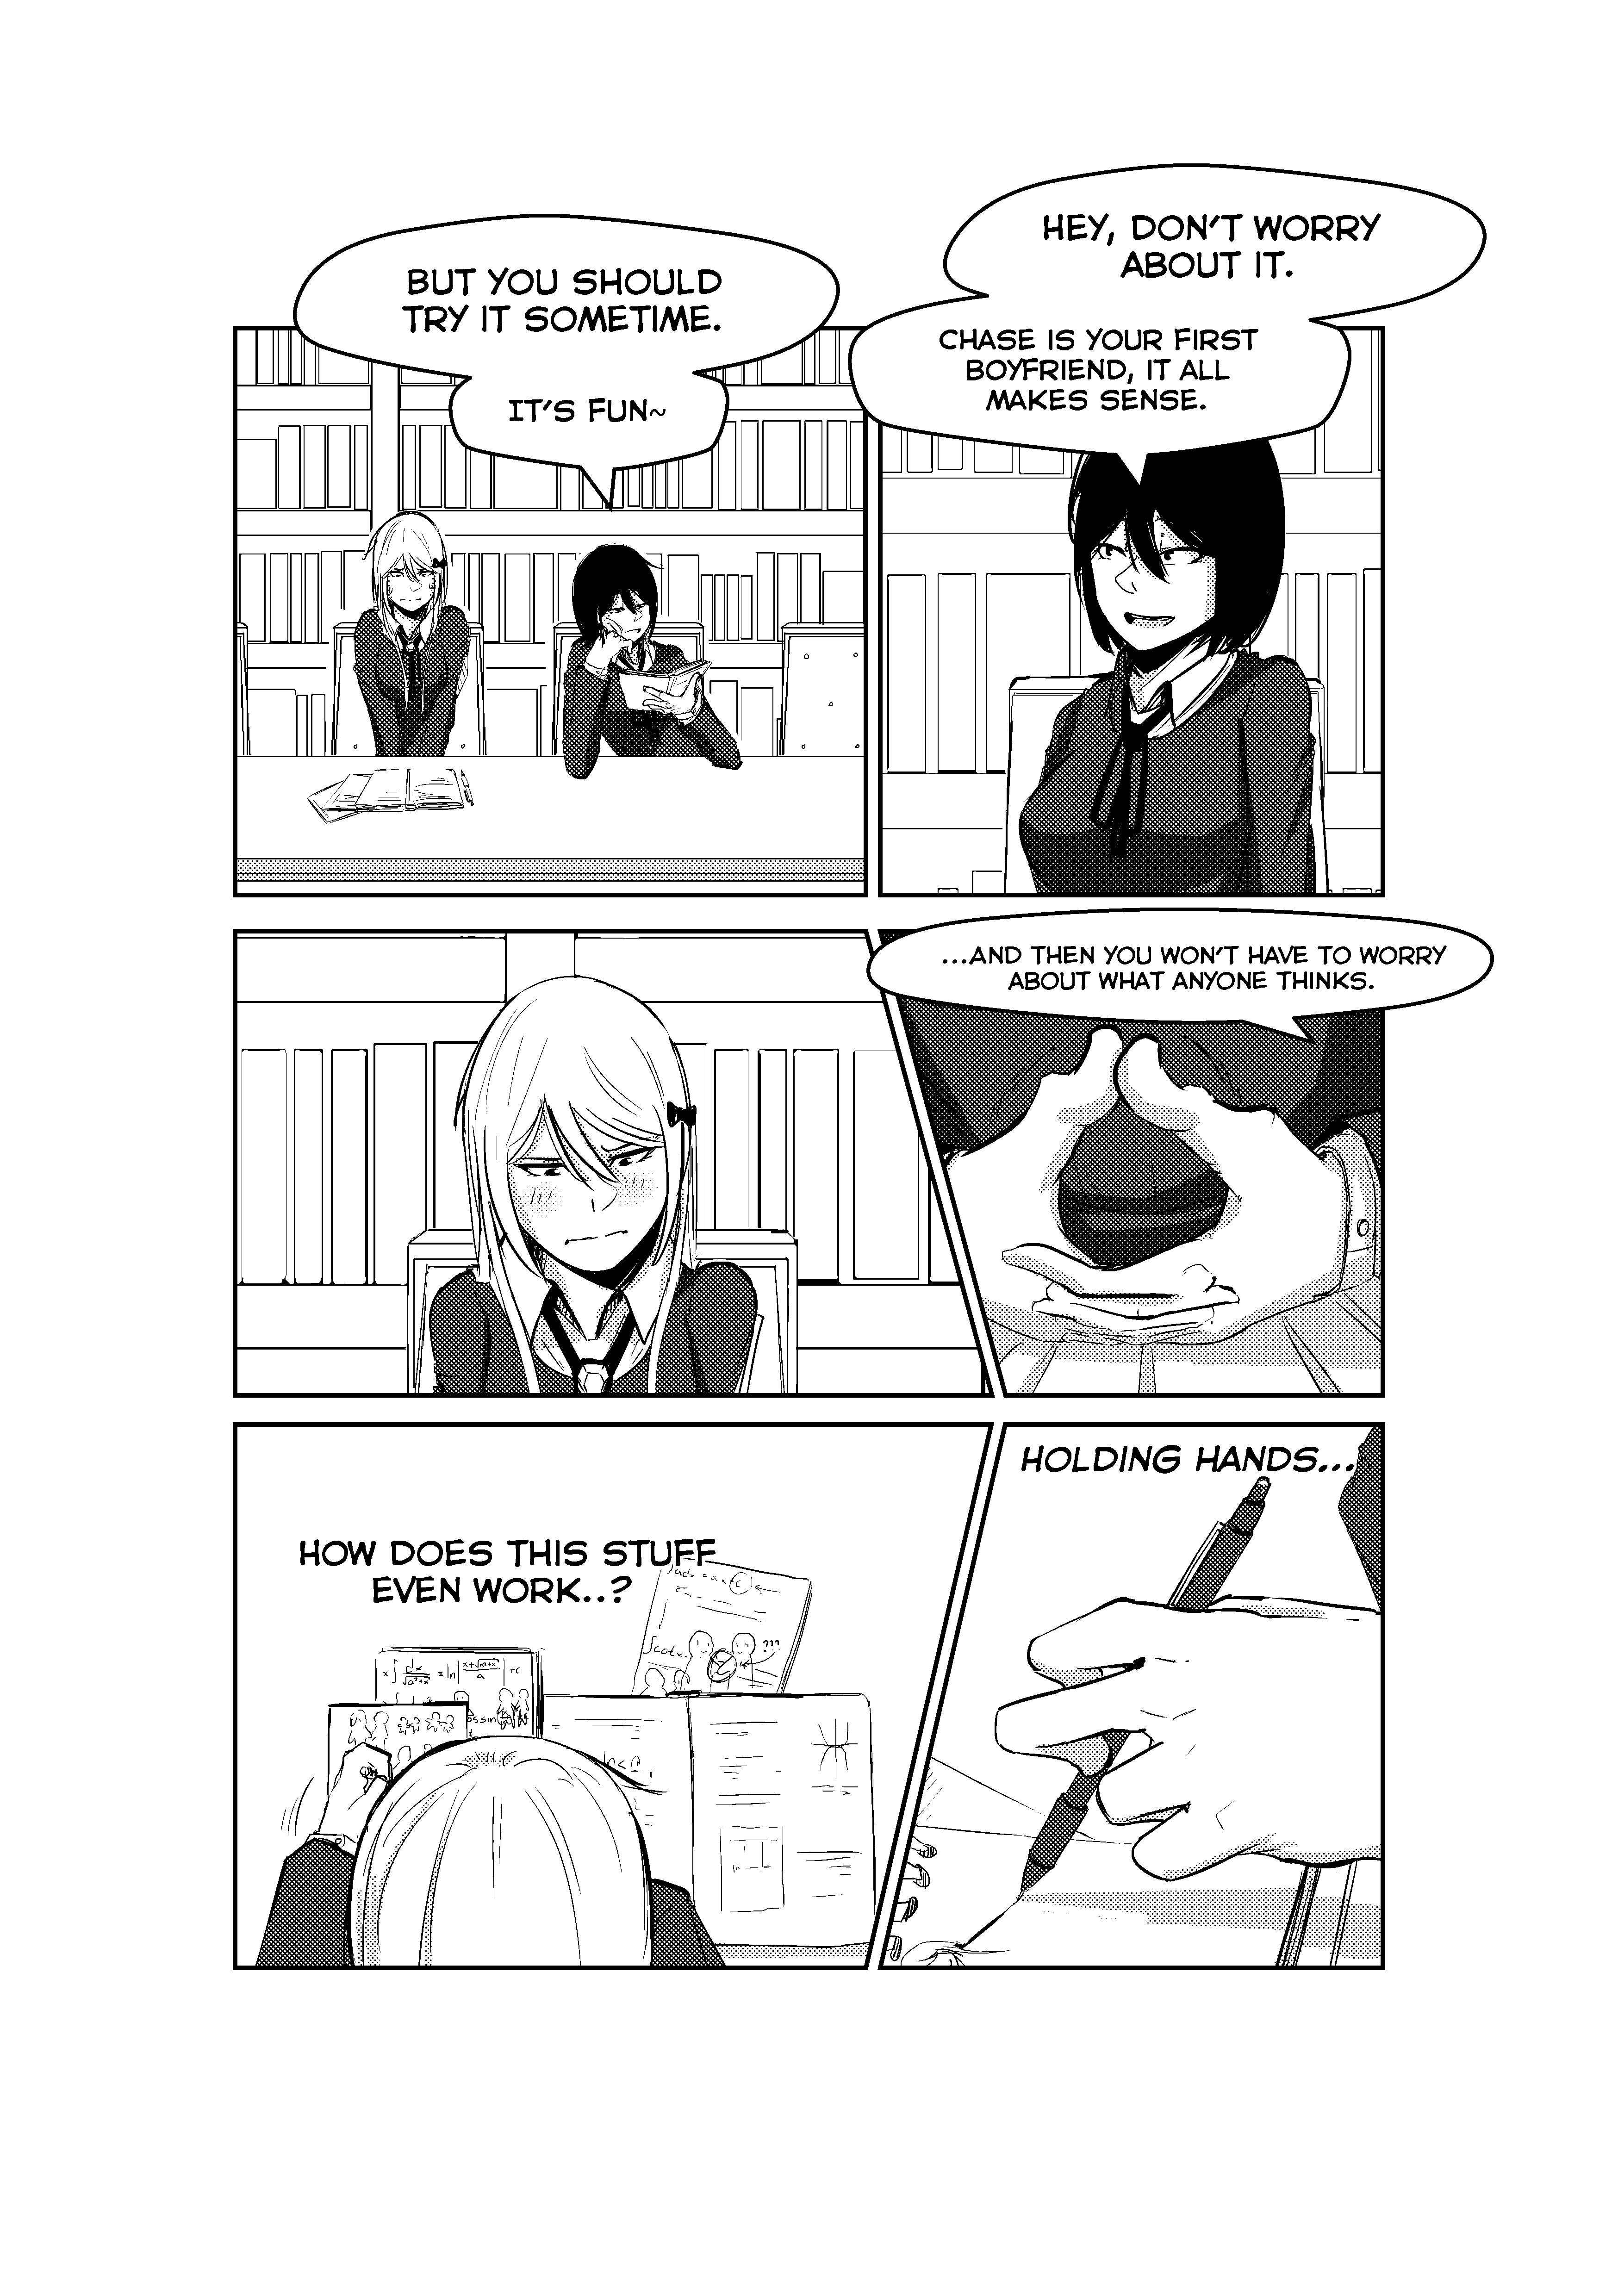 Opposites In Disguise - 8 page 14